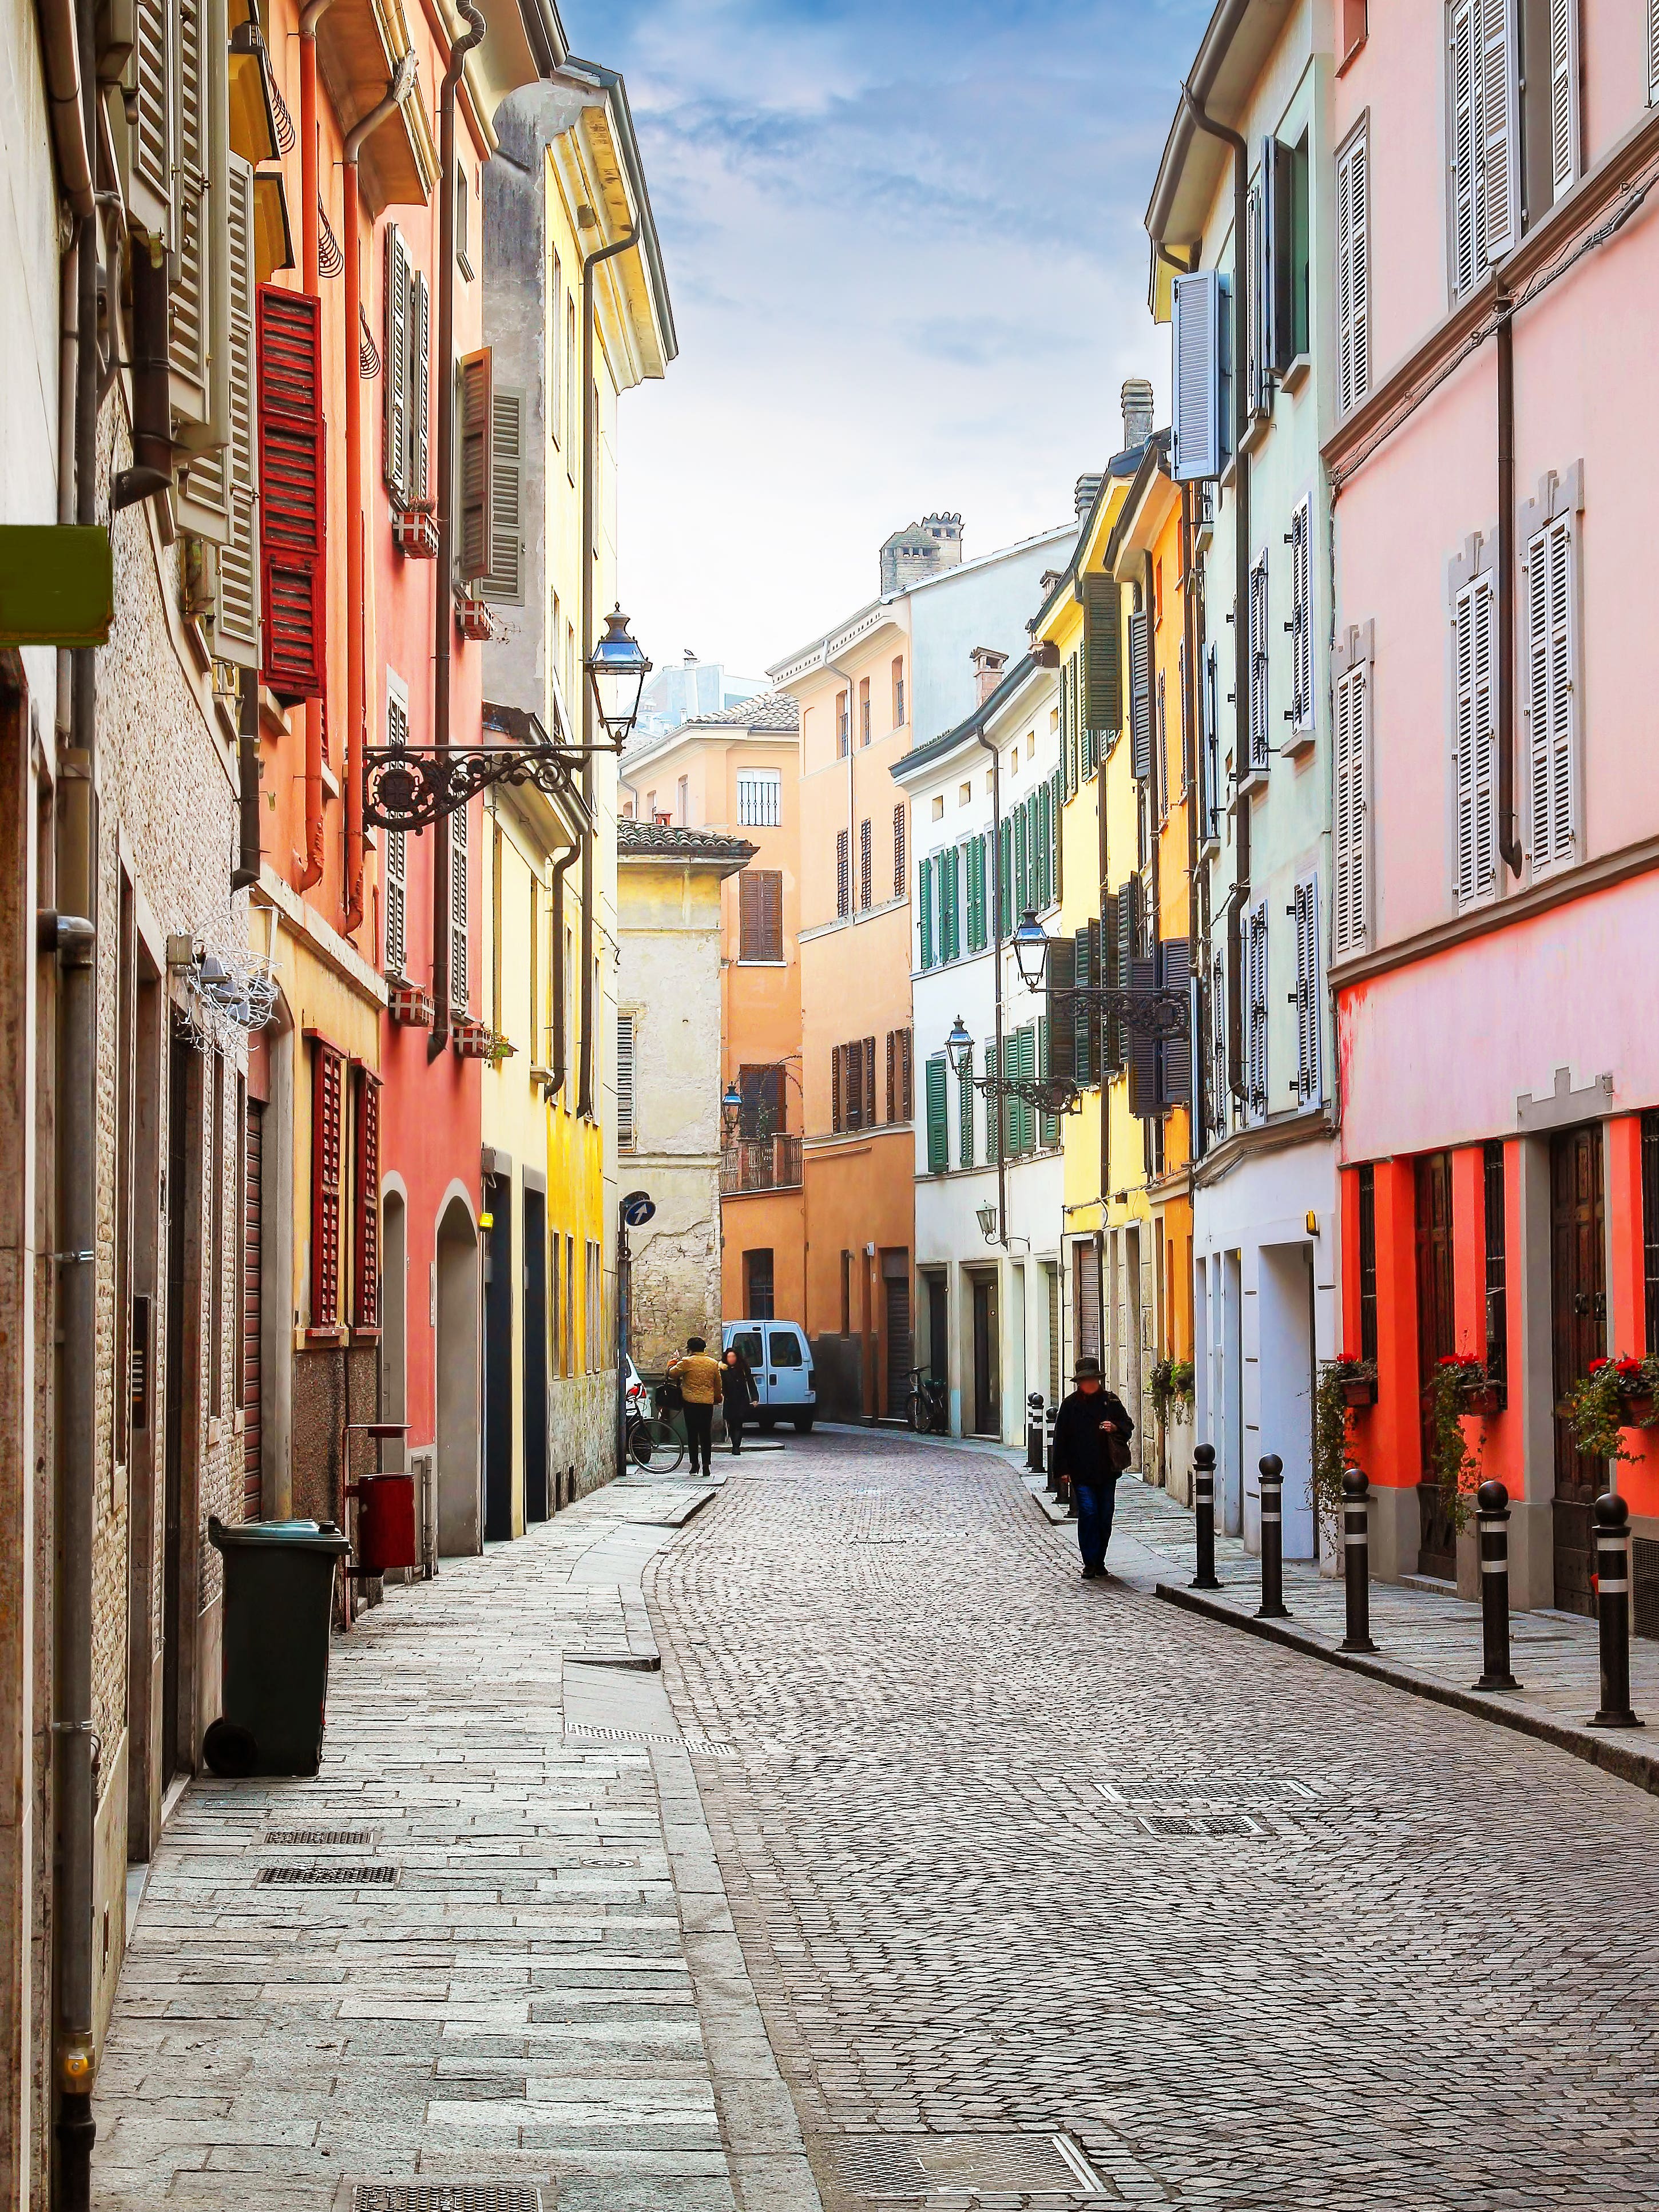 Why Parma Should Make Your Travel Hit List in 2019